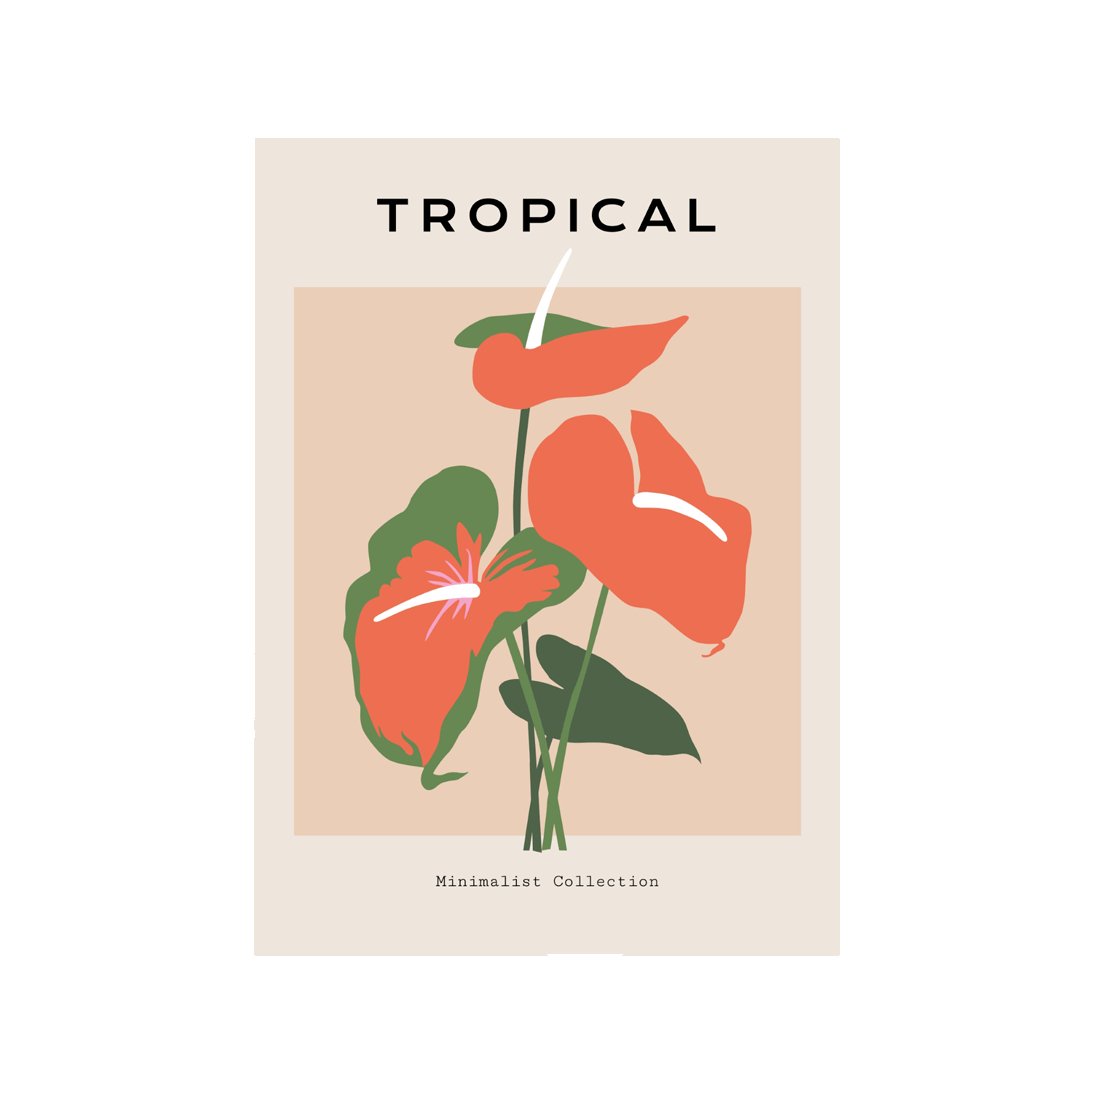 Tropical Day #13